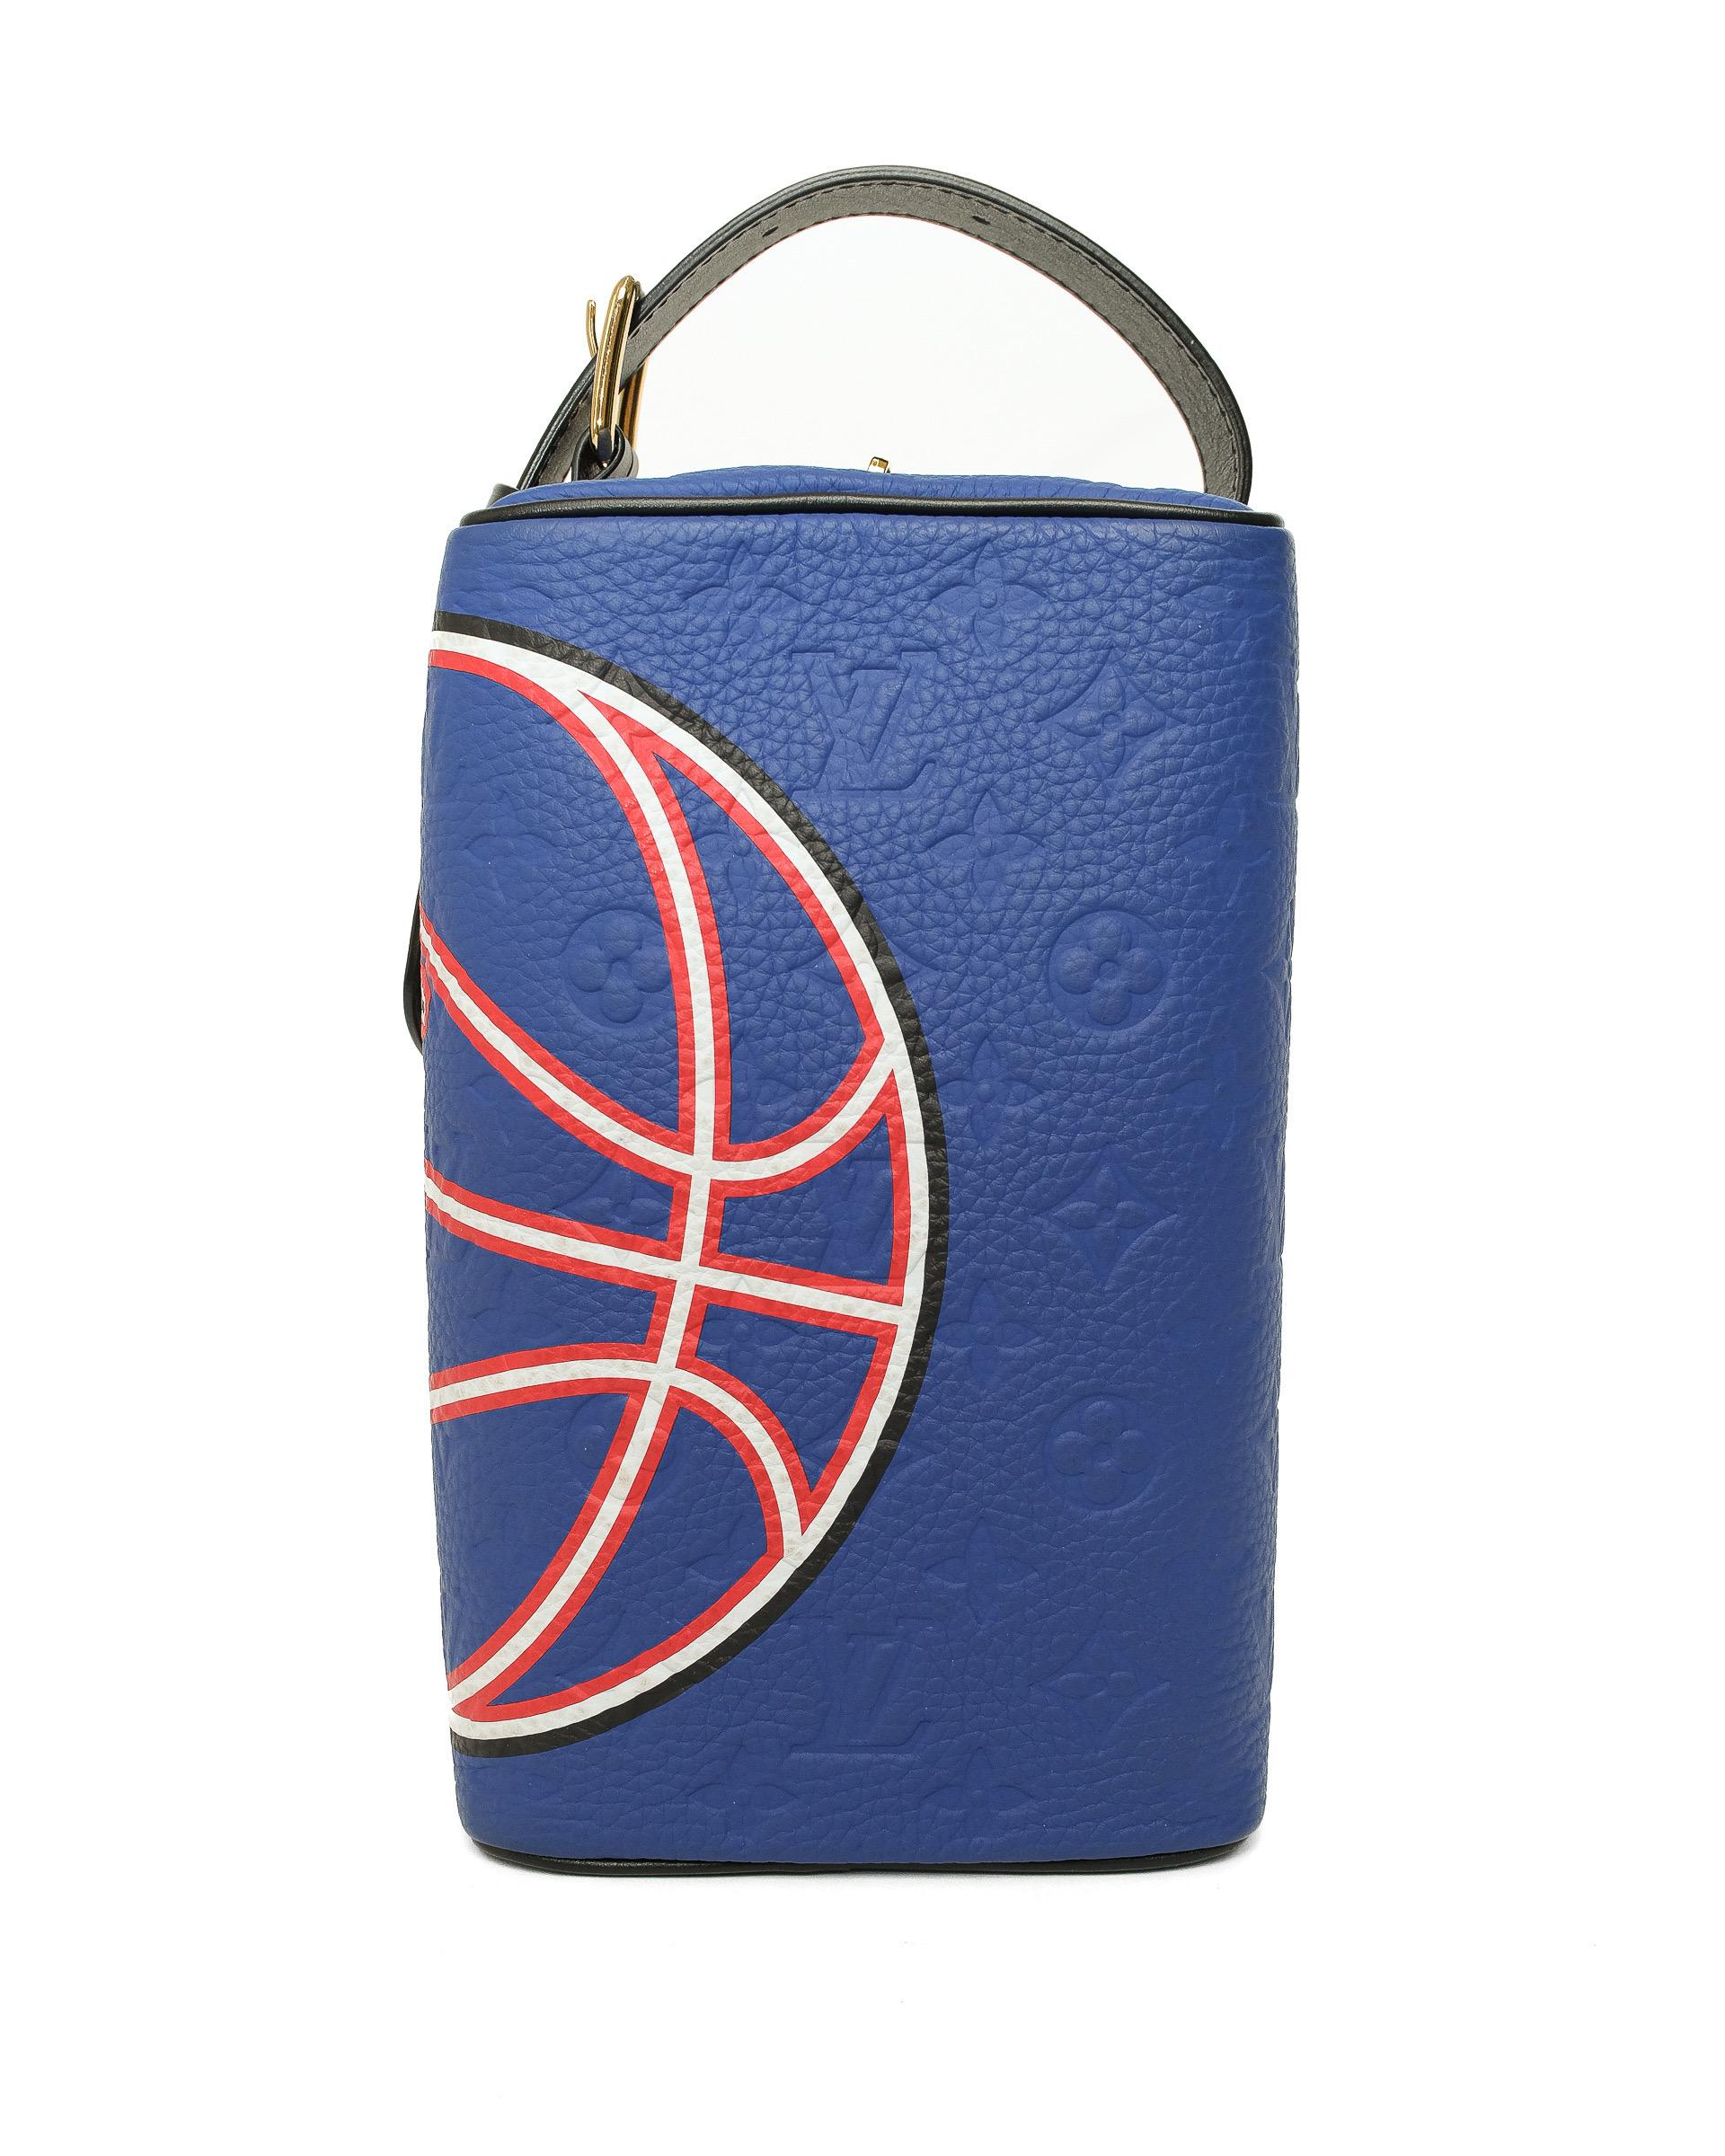 Louis Vuitton Cloakroom Dopp Kit NBA Blue Borsa A Mano  In Excellent Condition For Sale In Torre Del Greco, IT